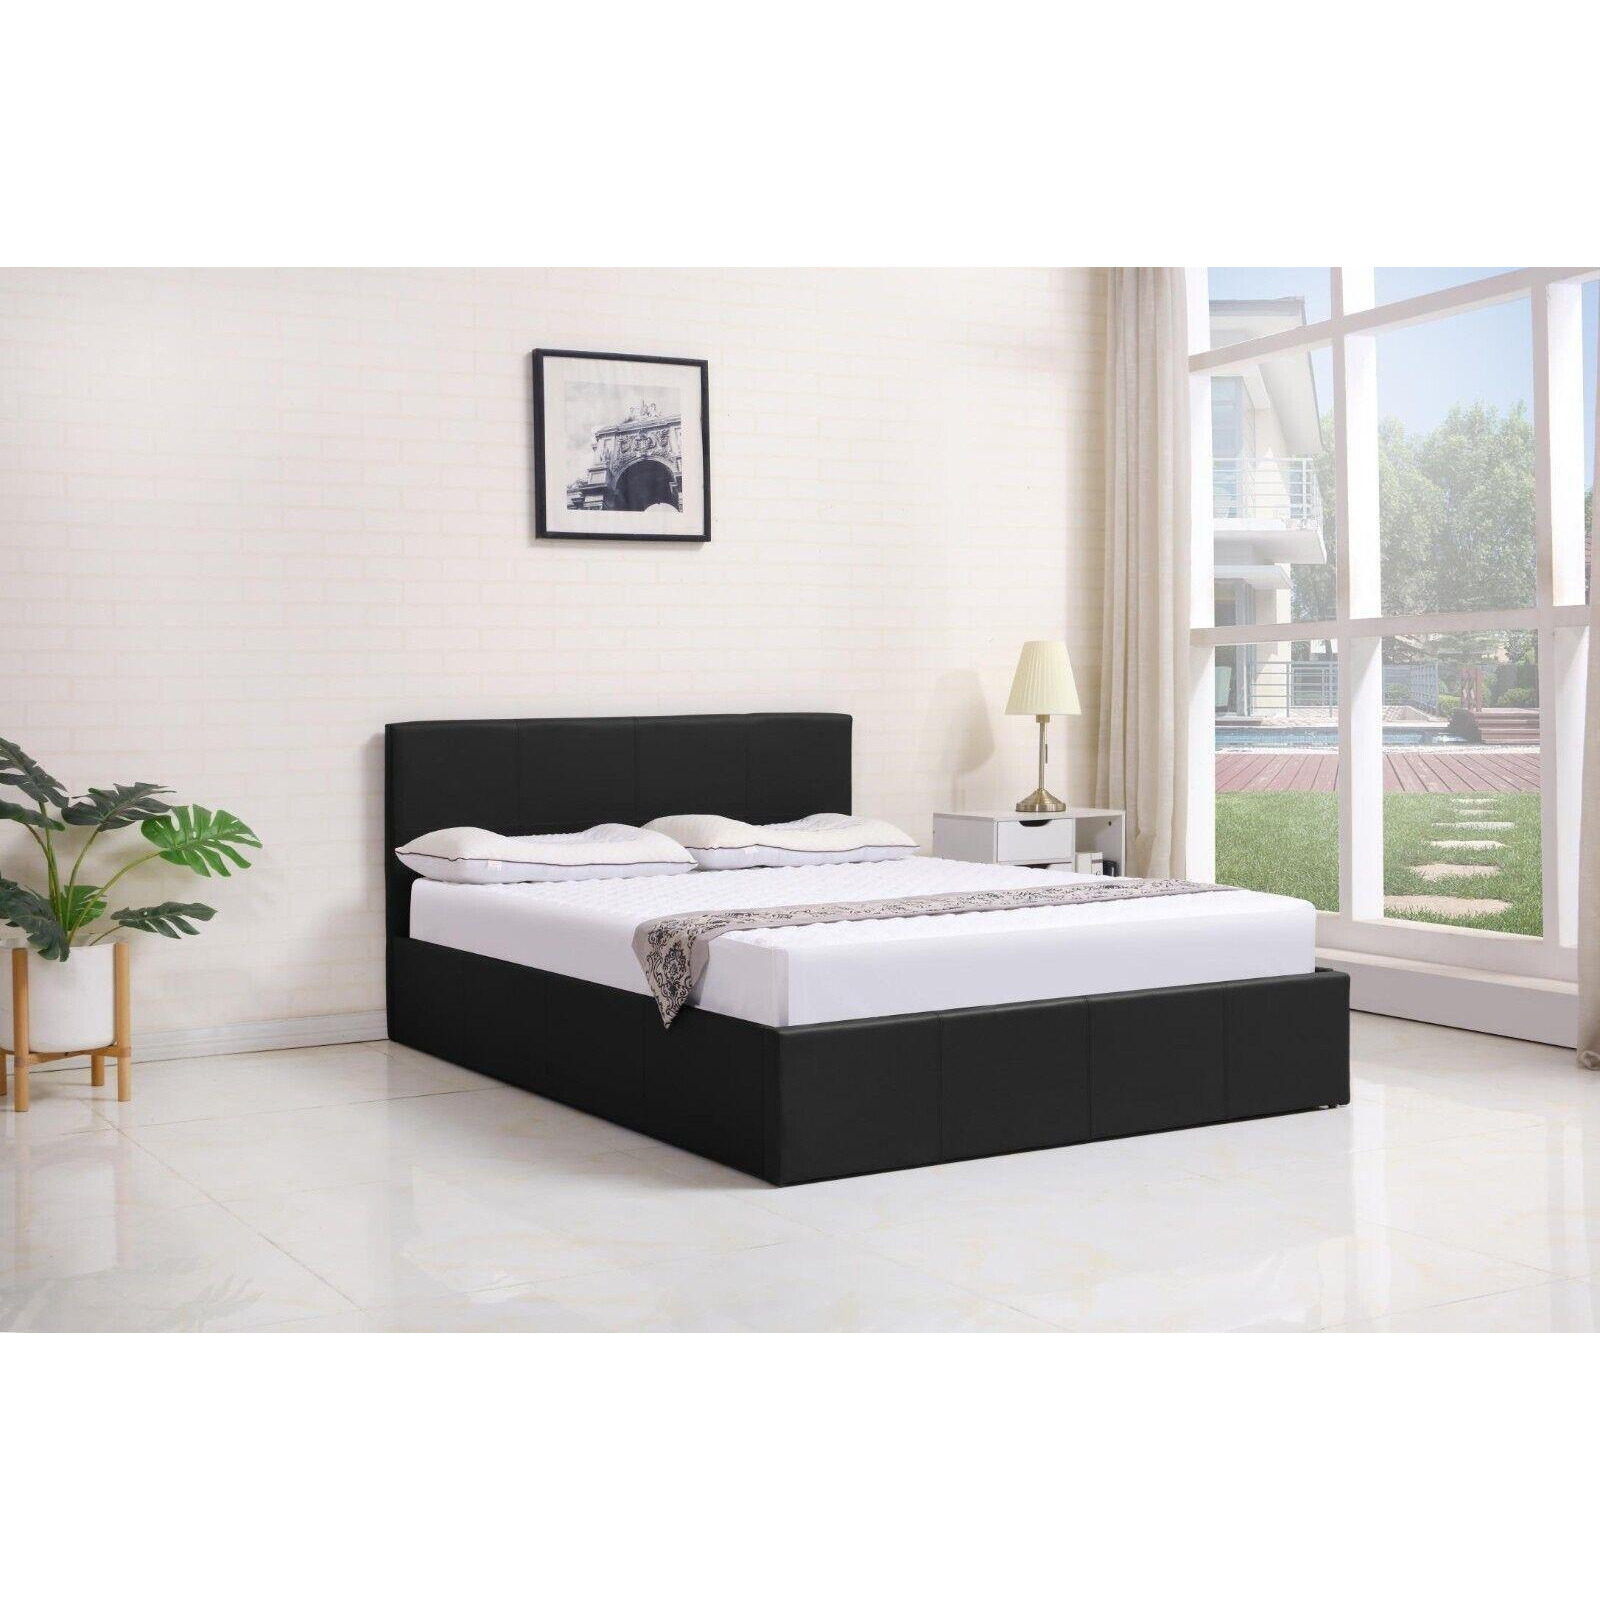 Ottoman Storage Bed black 3ft single leather and 1 memory foam spring mattress bedroom furniture - image 1